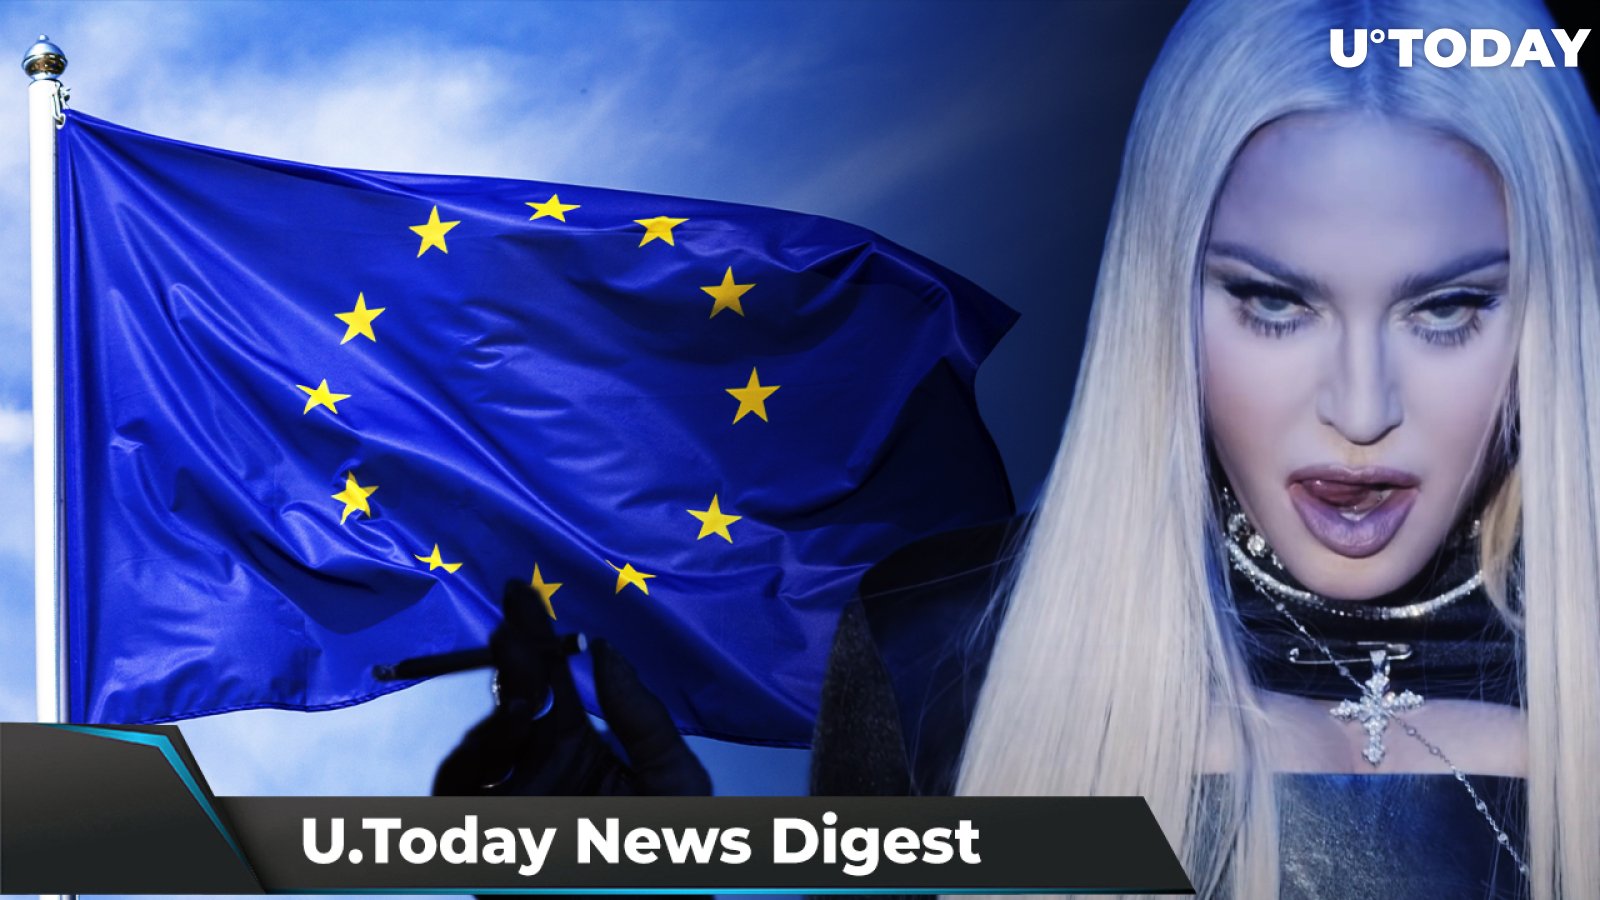 EU Cracks Down on Unhosted Wallets, Ripple Lawyers Call for “Sanctions” Against SEC, Madonna Buys Bored Ape NFT: Crypto News Digest by U.Today